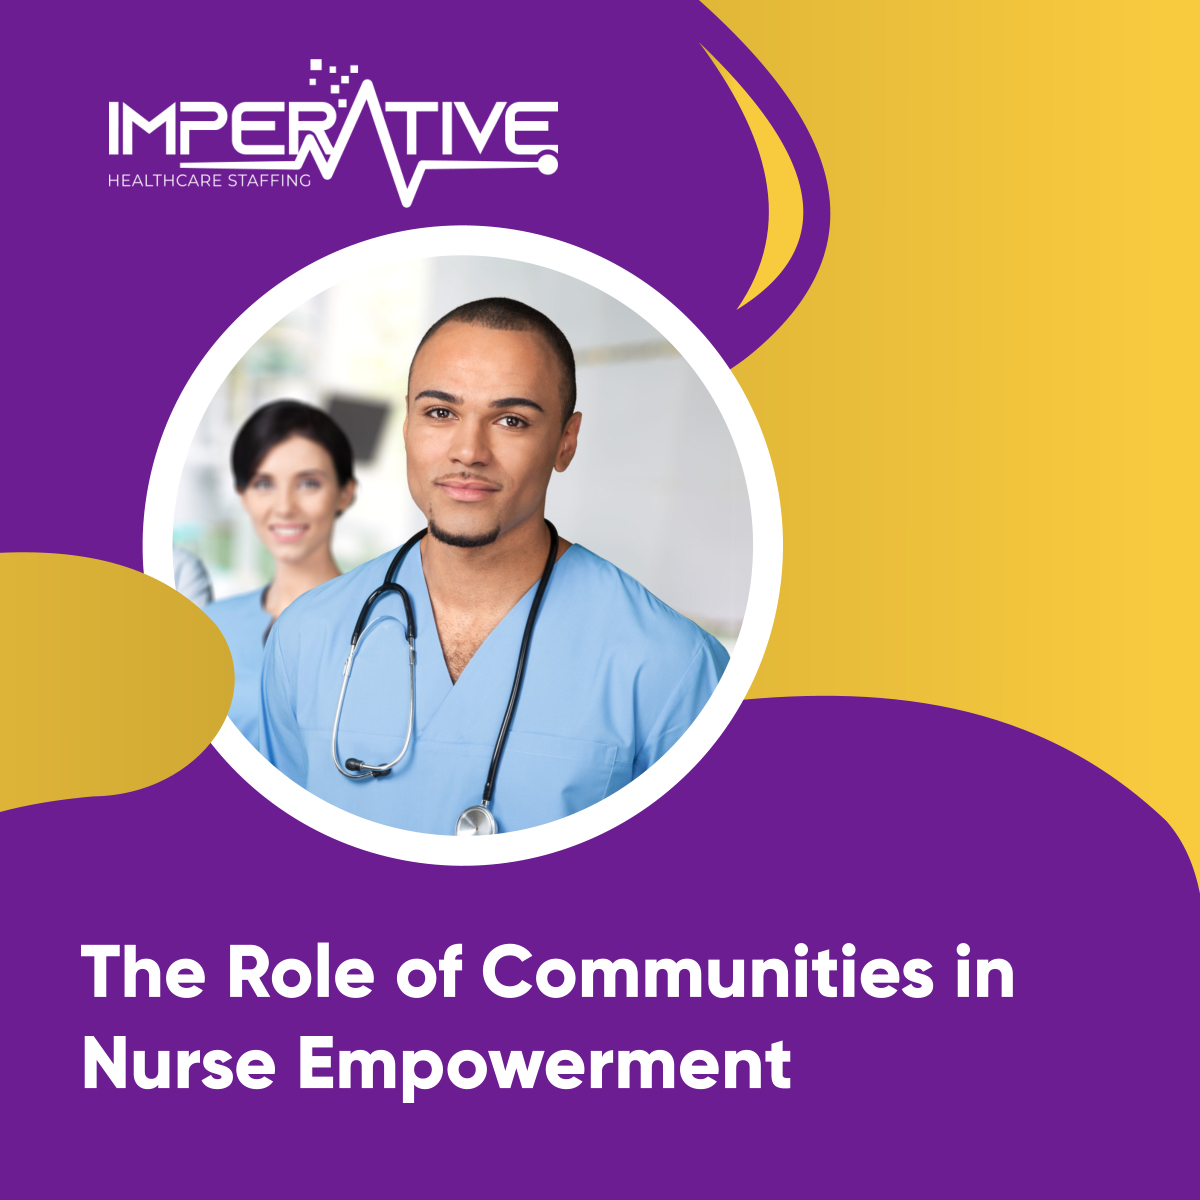 By engaging in open and respectful dialogue, communities can raise awareness about the challenges nurses face in the workplace. 

Read more: facebook.com/permalink.php?…

#NurseEmpowerment #Communities #HealthcareStaffing #GrapevineTX #ImperativeHealthcareStaffing